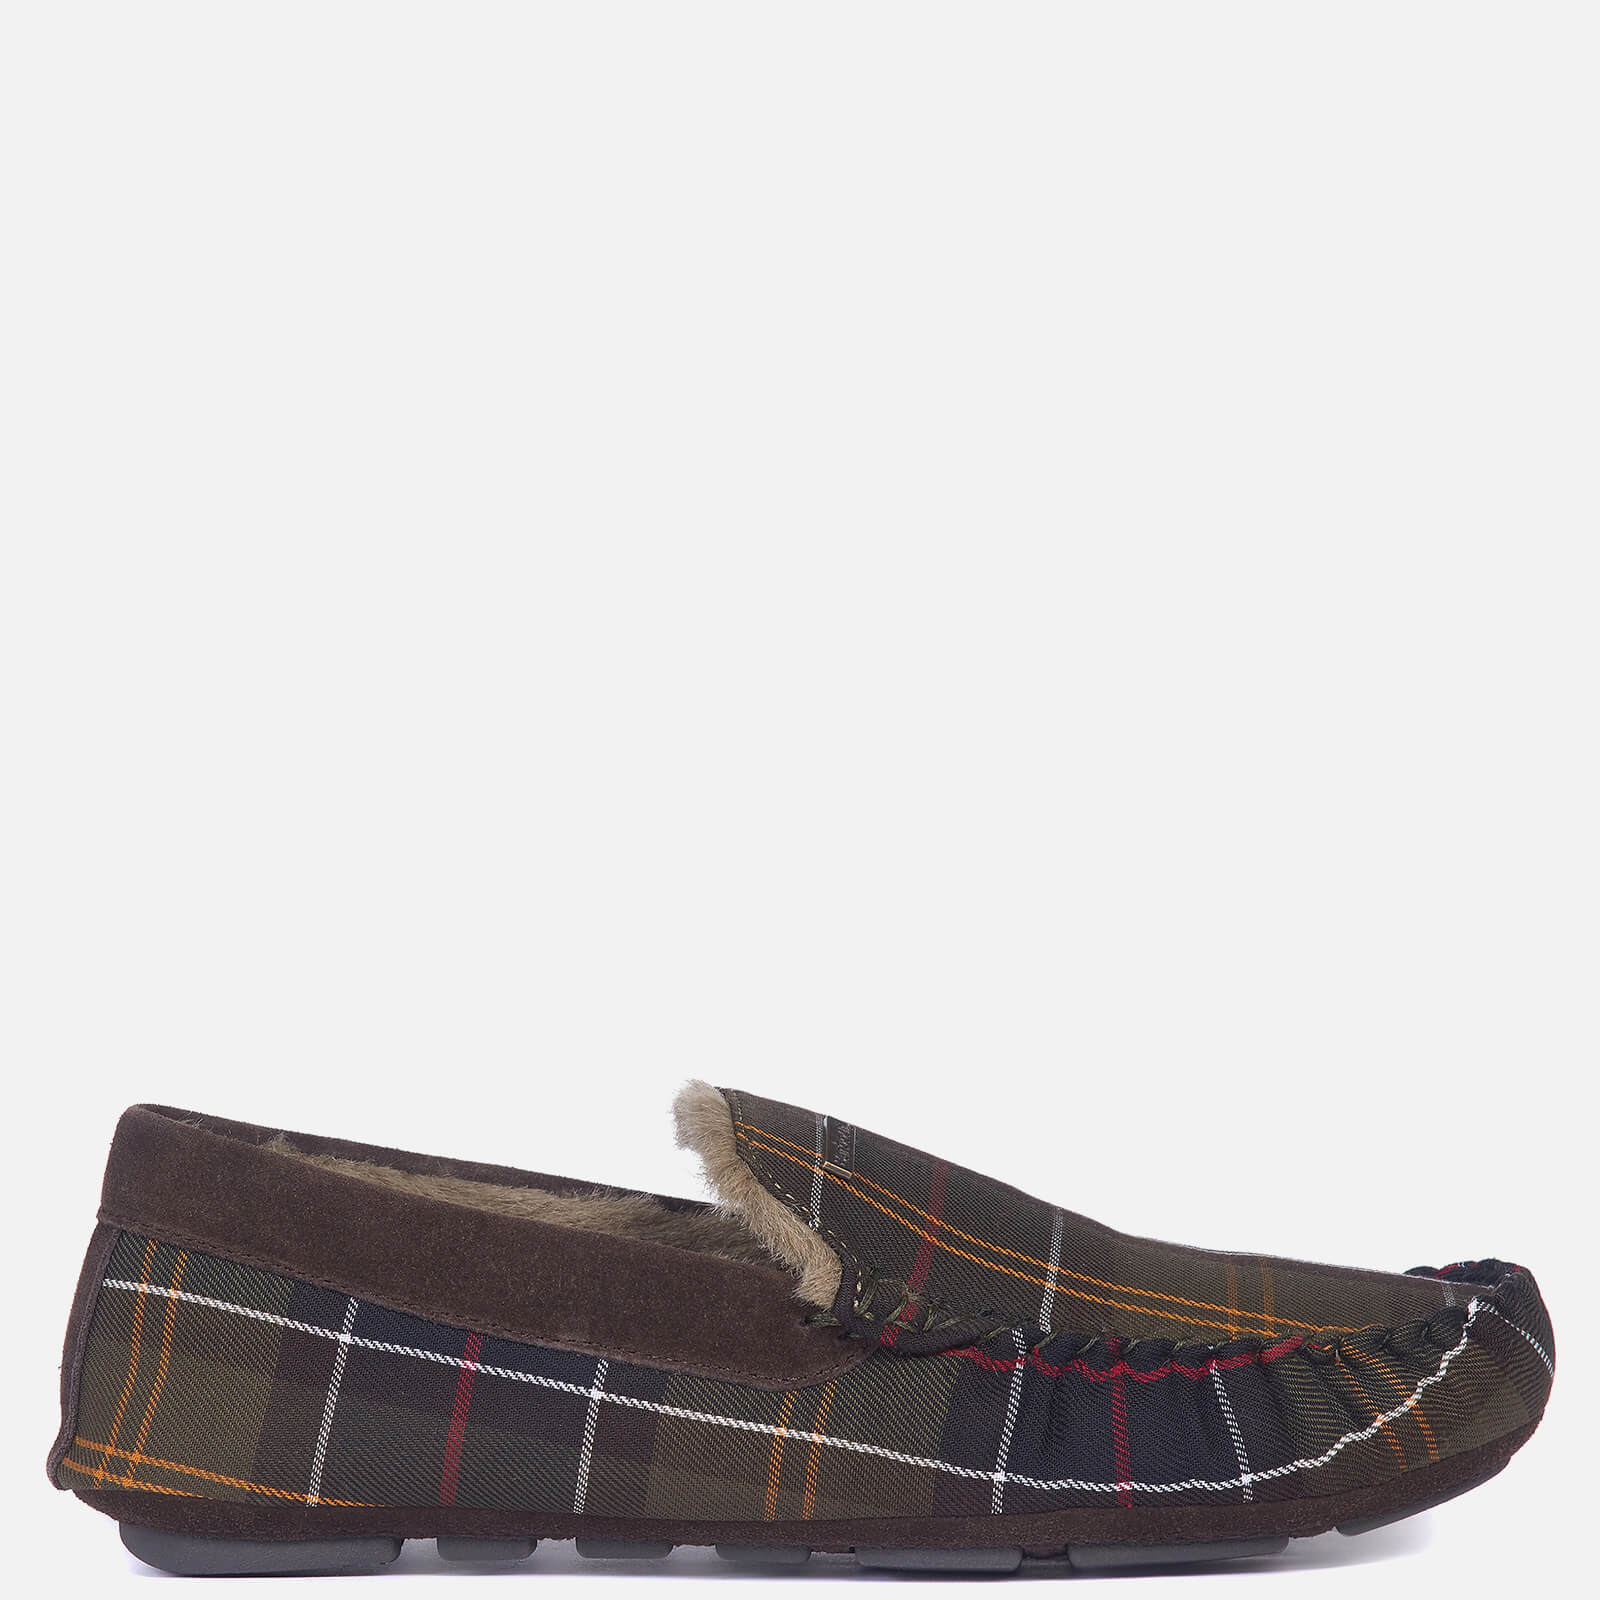 Barbour Men's Monty Moccasin Slippers - Recycled Classic Tartan - UK 9